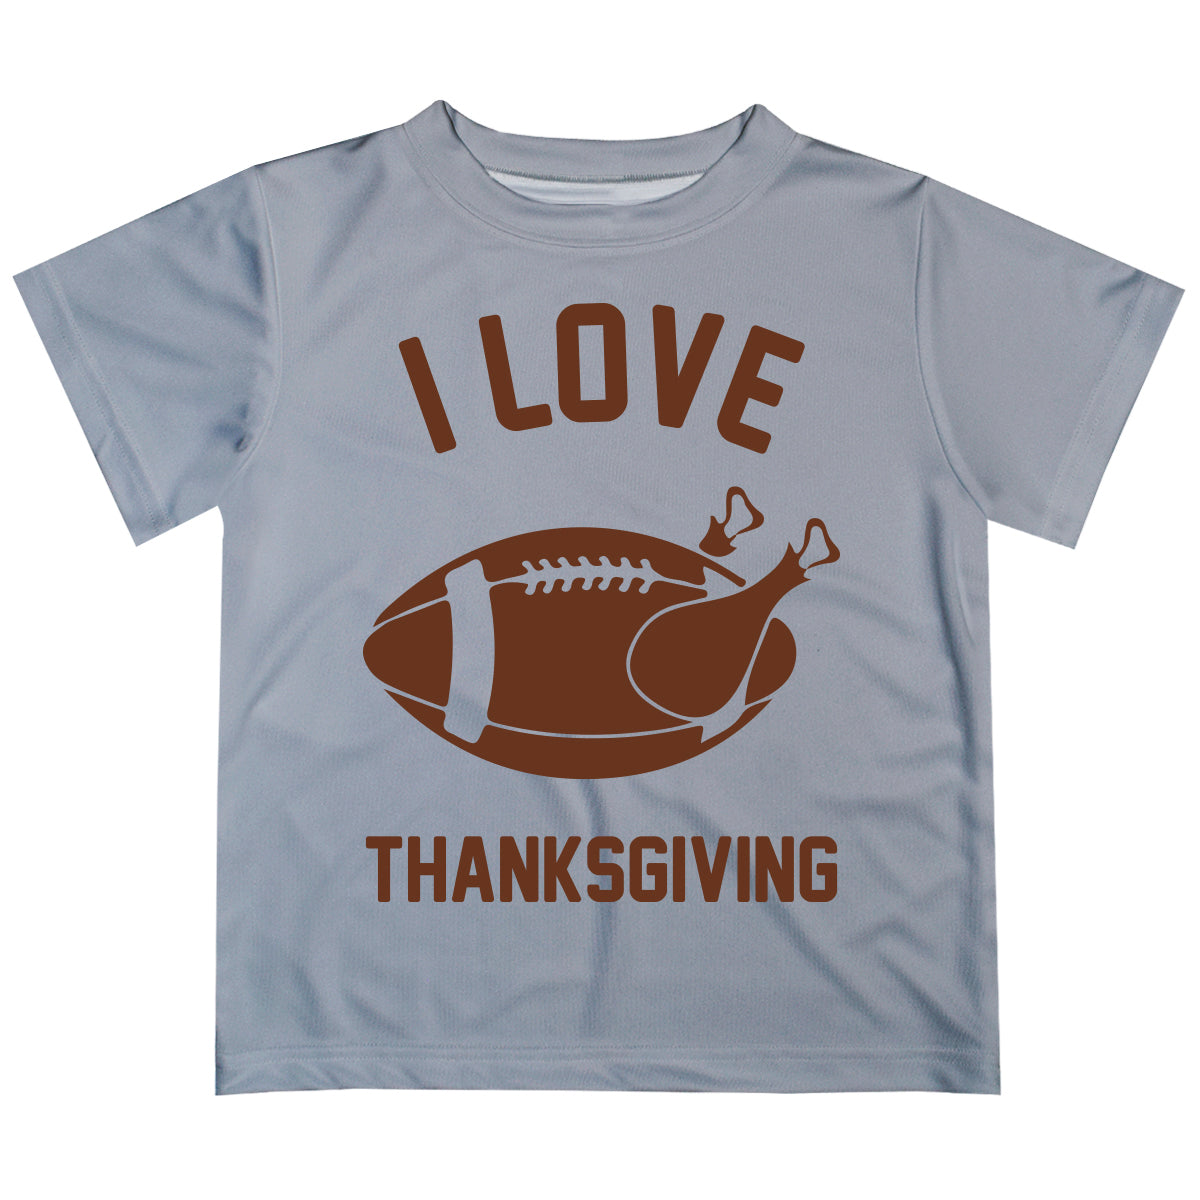 Boys grey and brown thanksgiving tee shirt - Wimziy&Co.